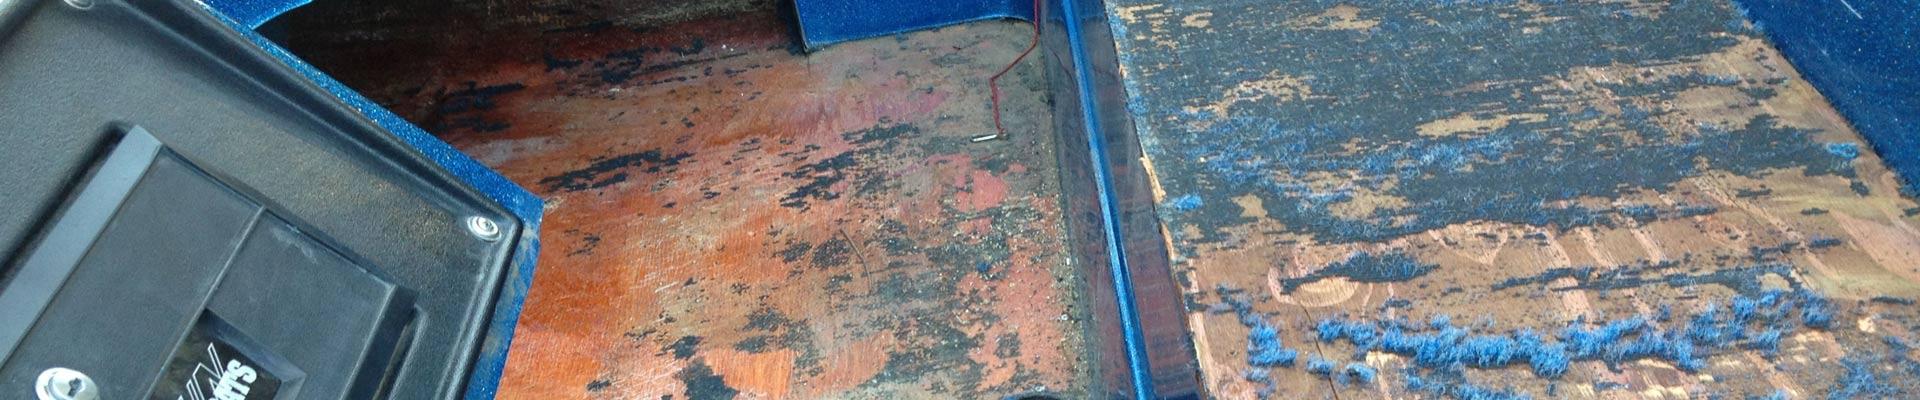 Boat Deck Carpet Replacement The